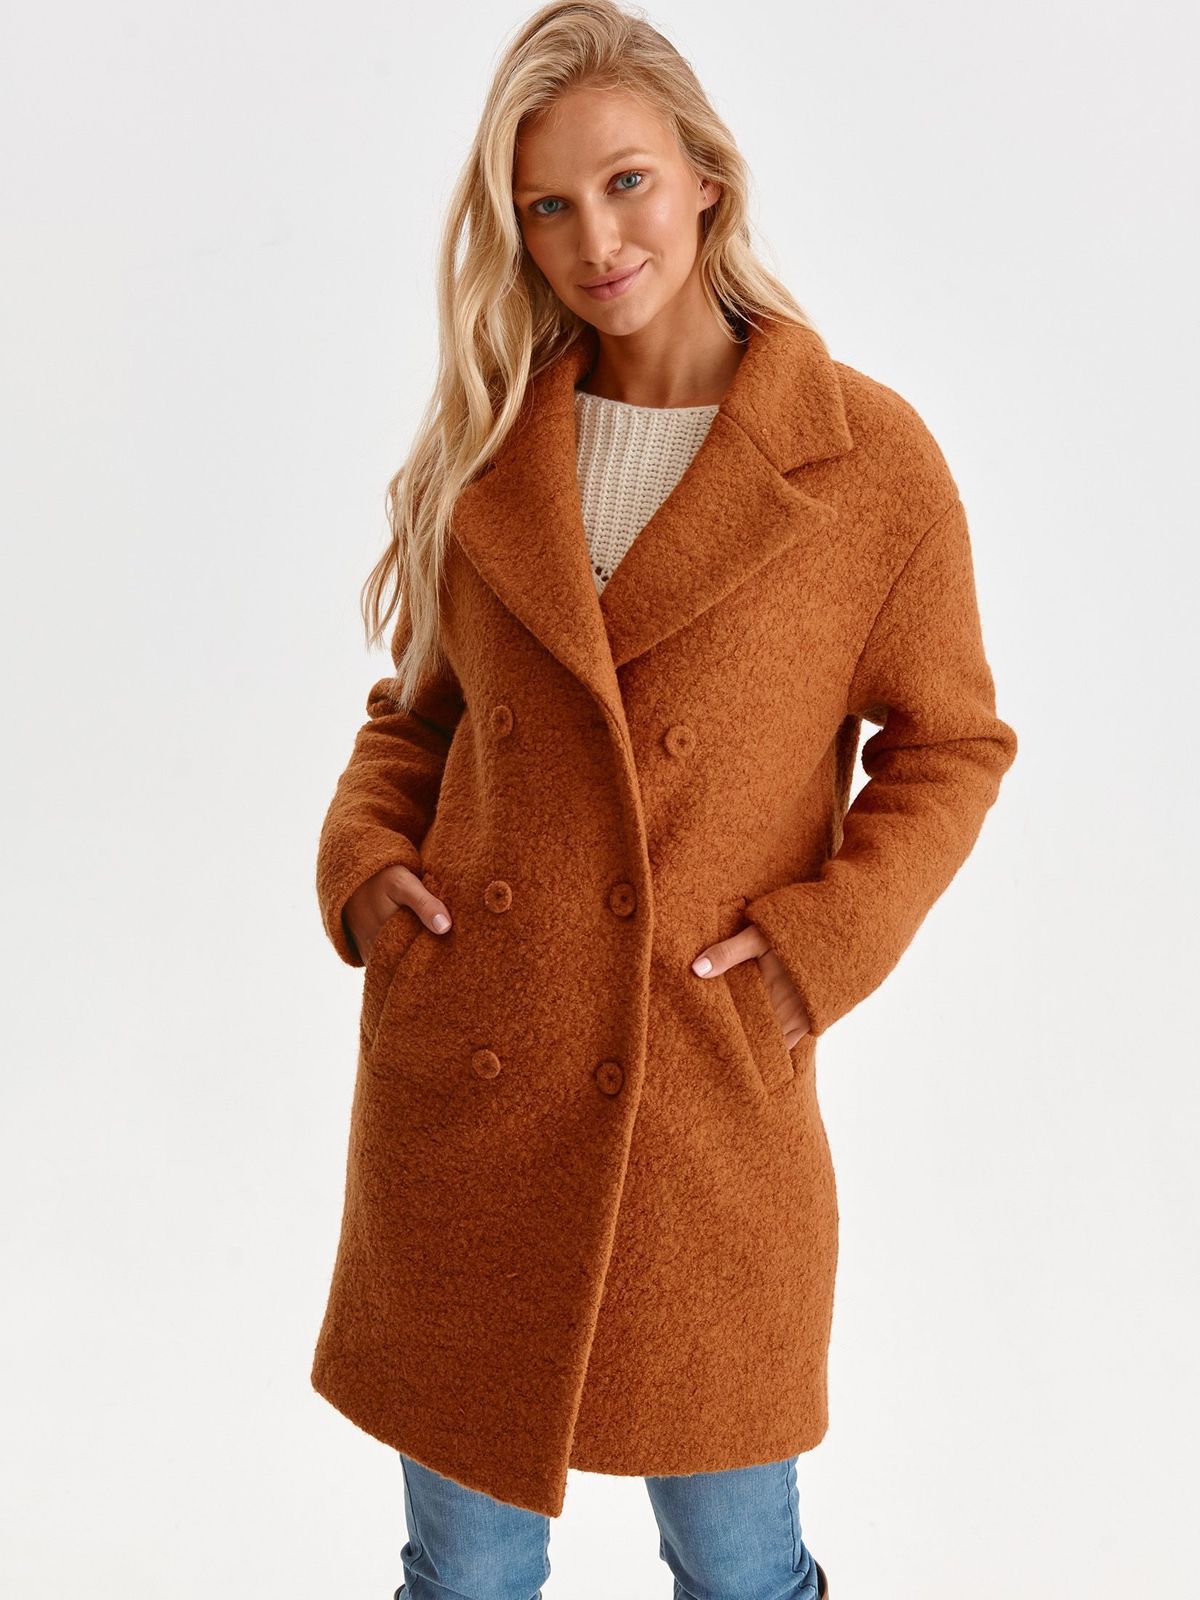 Brown coat from fluffy fabric with pockets straight